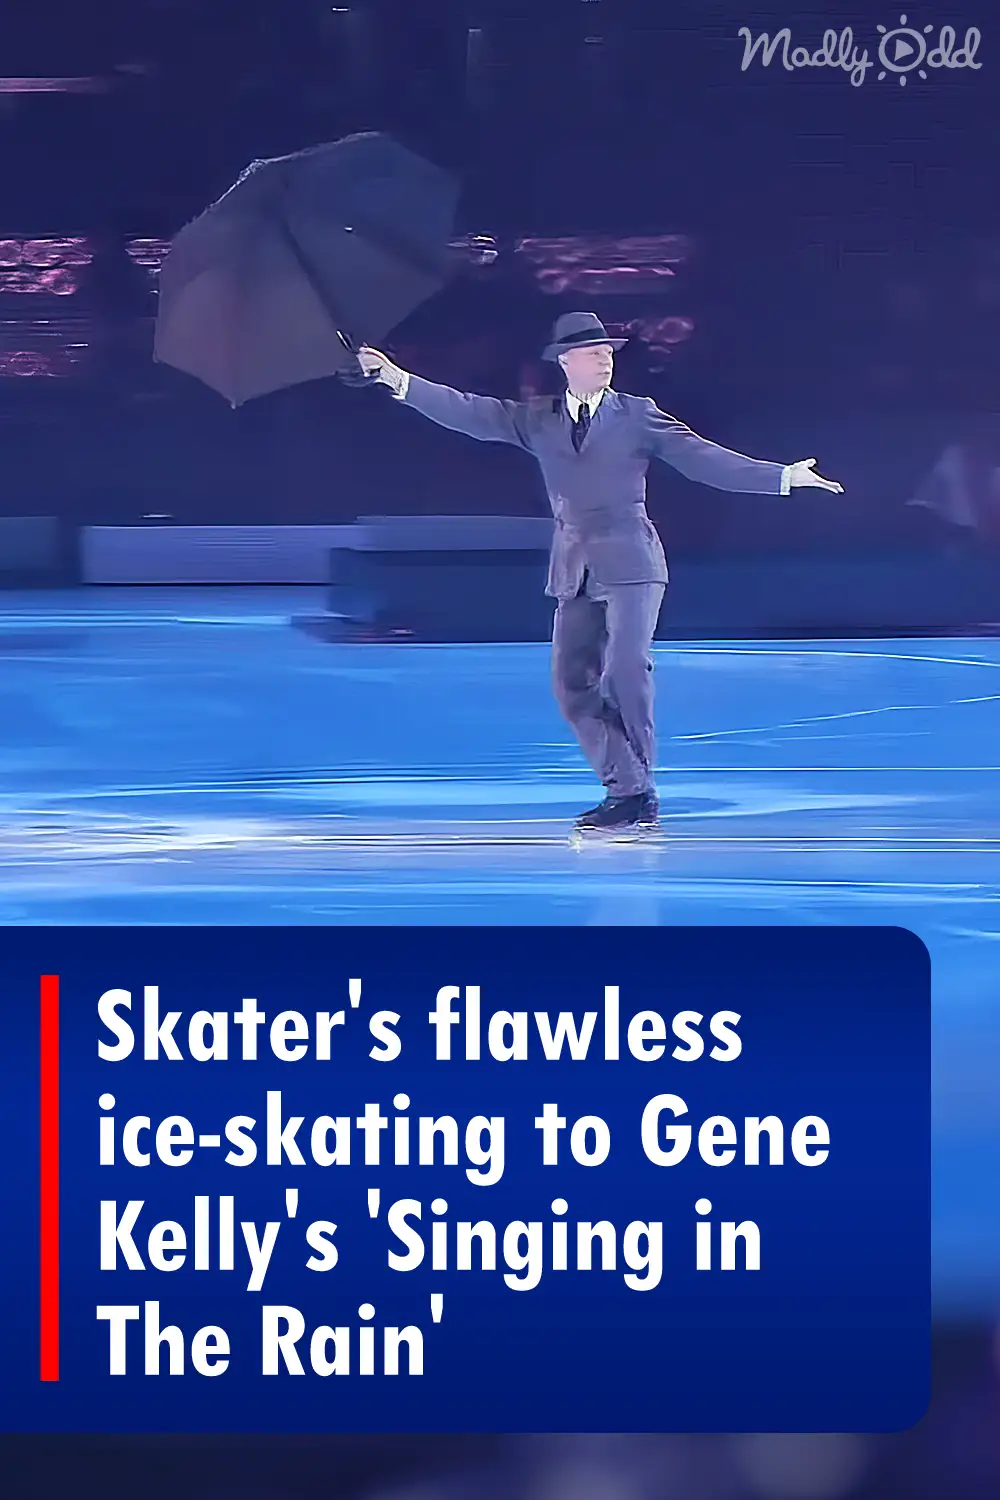 Skater's flawless ice-skating to Gene Kelly's 'Singing in The Rain'